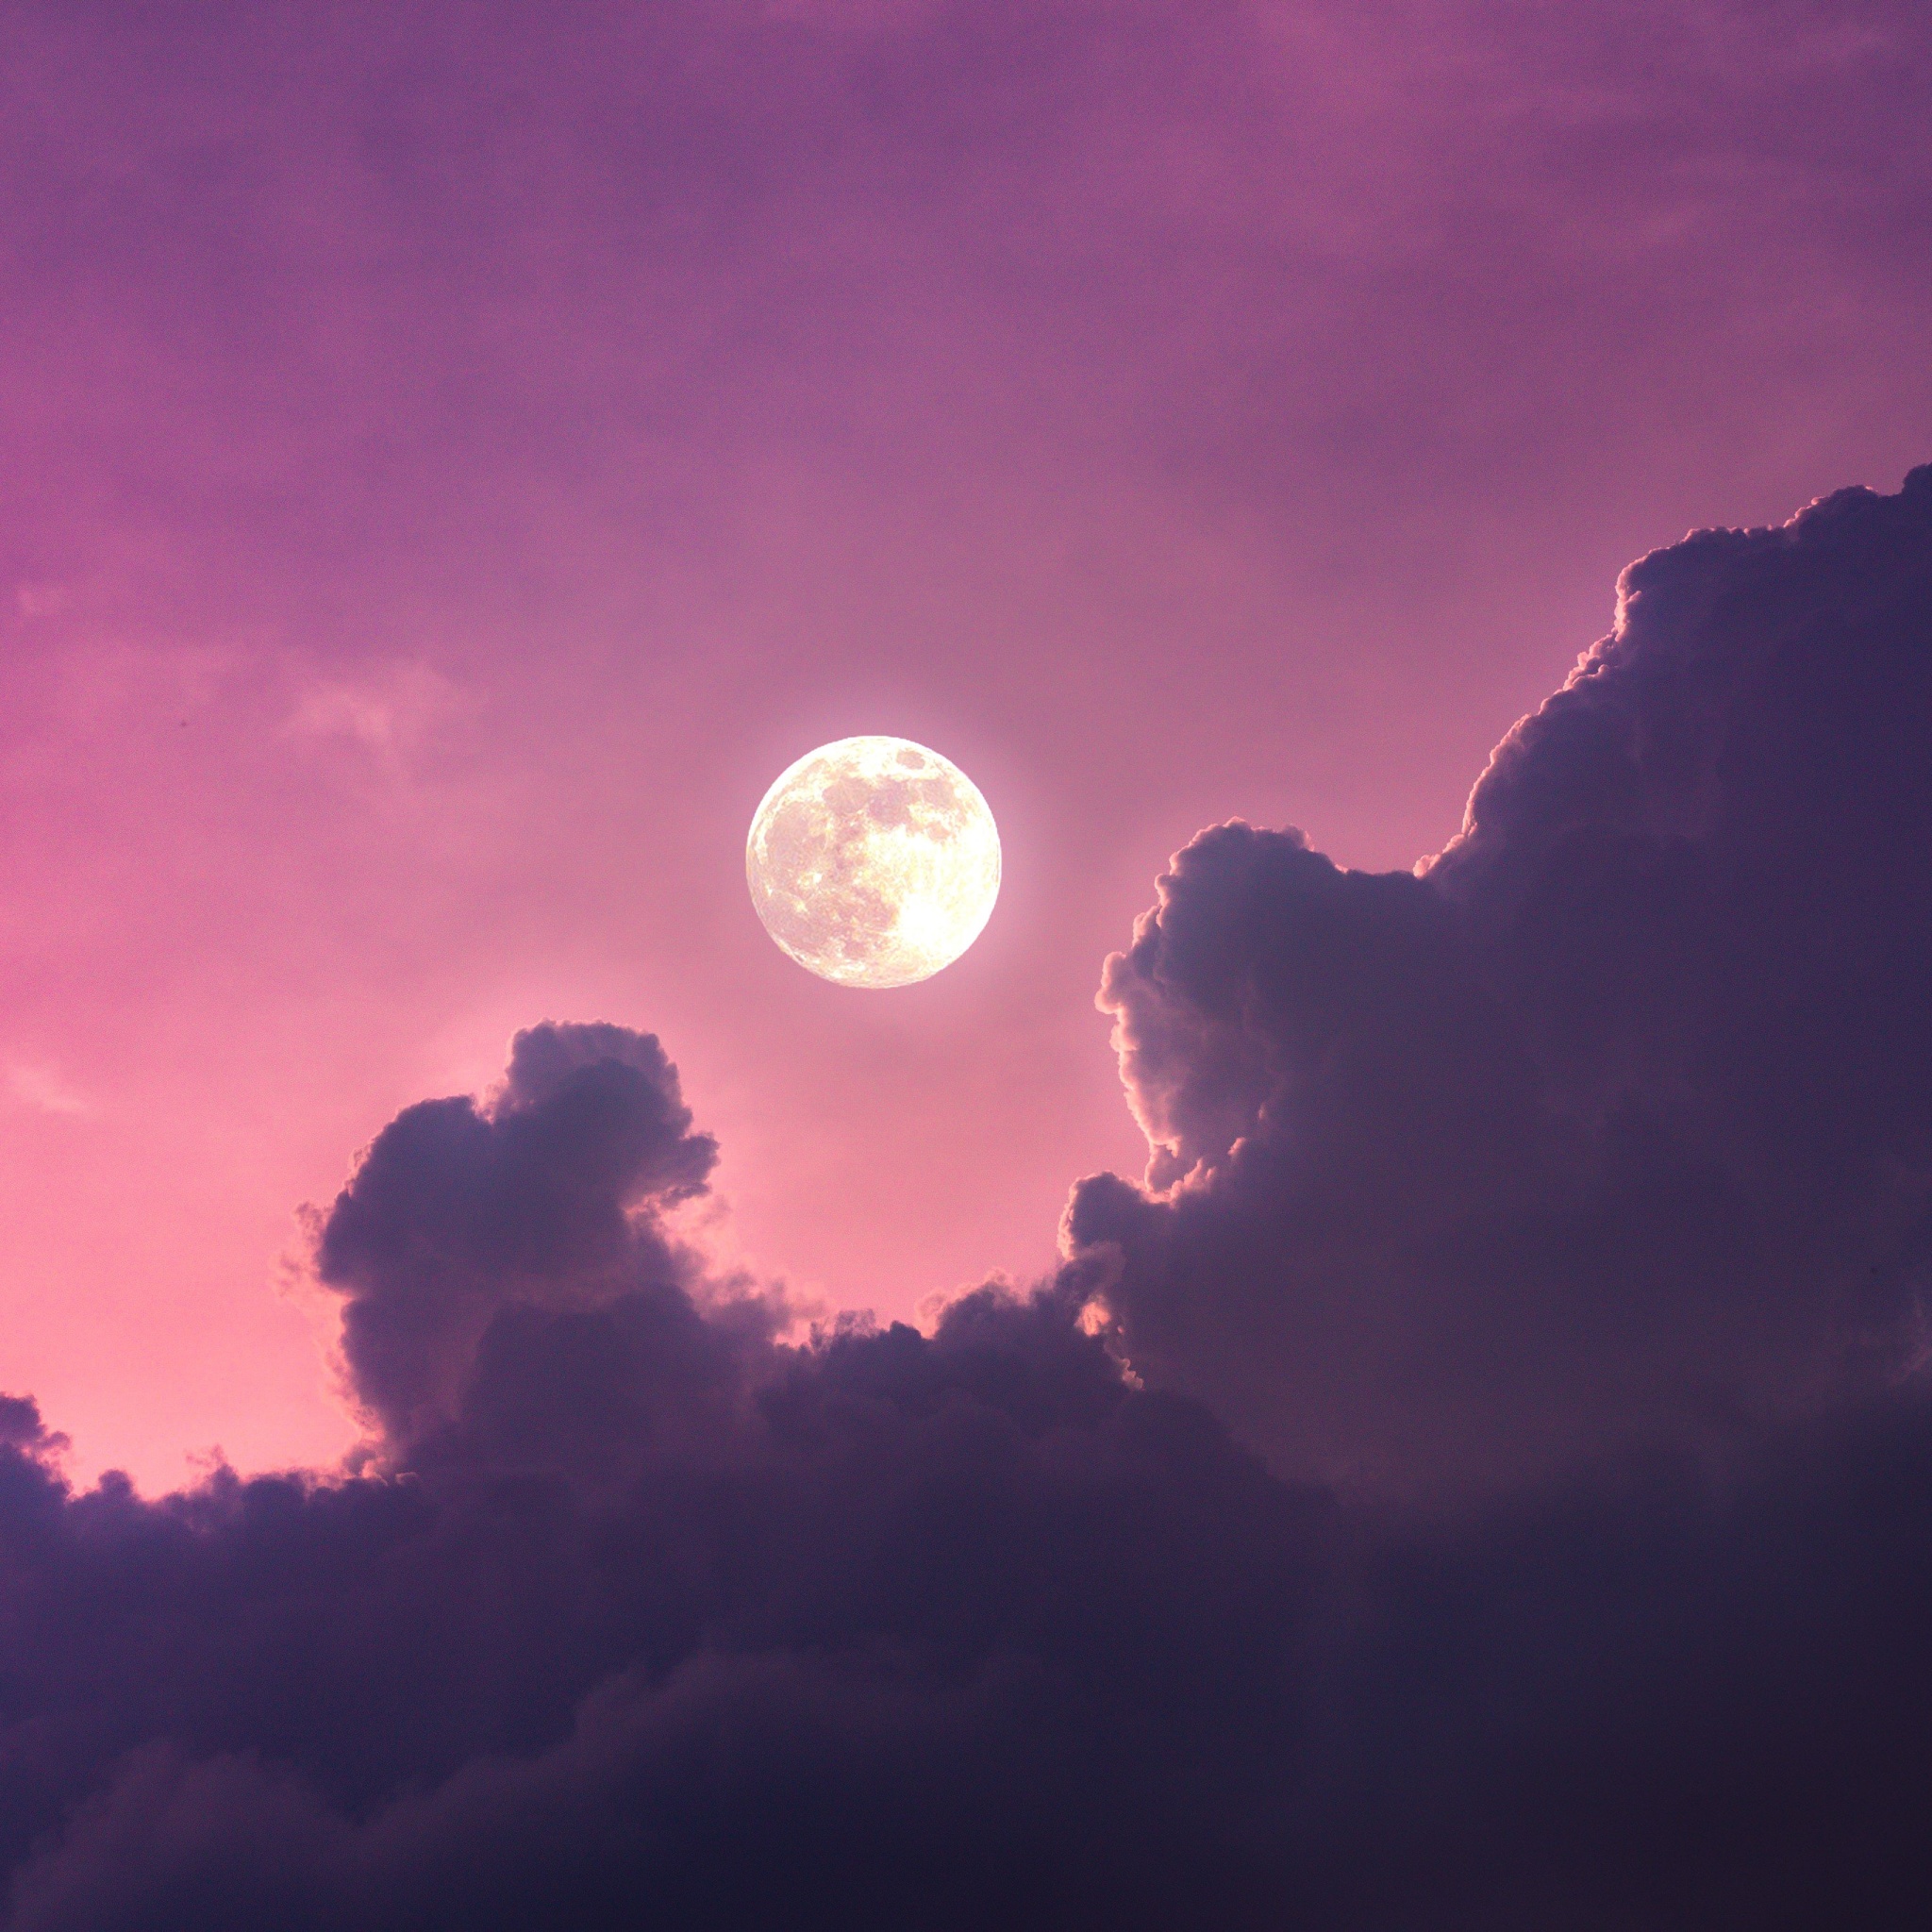 Full moon Wallpaper 4K, Clouds, Pink sky, Scenic, Aesthetic, Nature